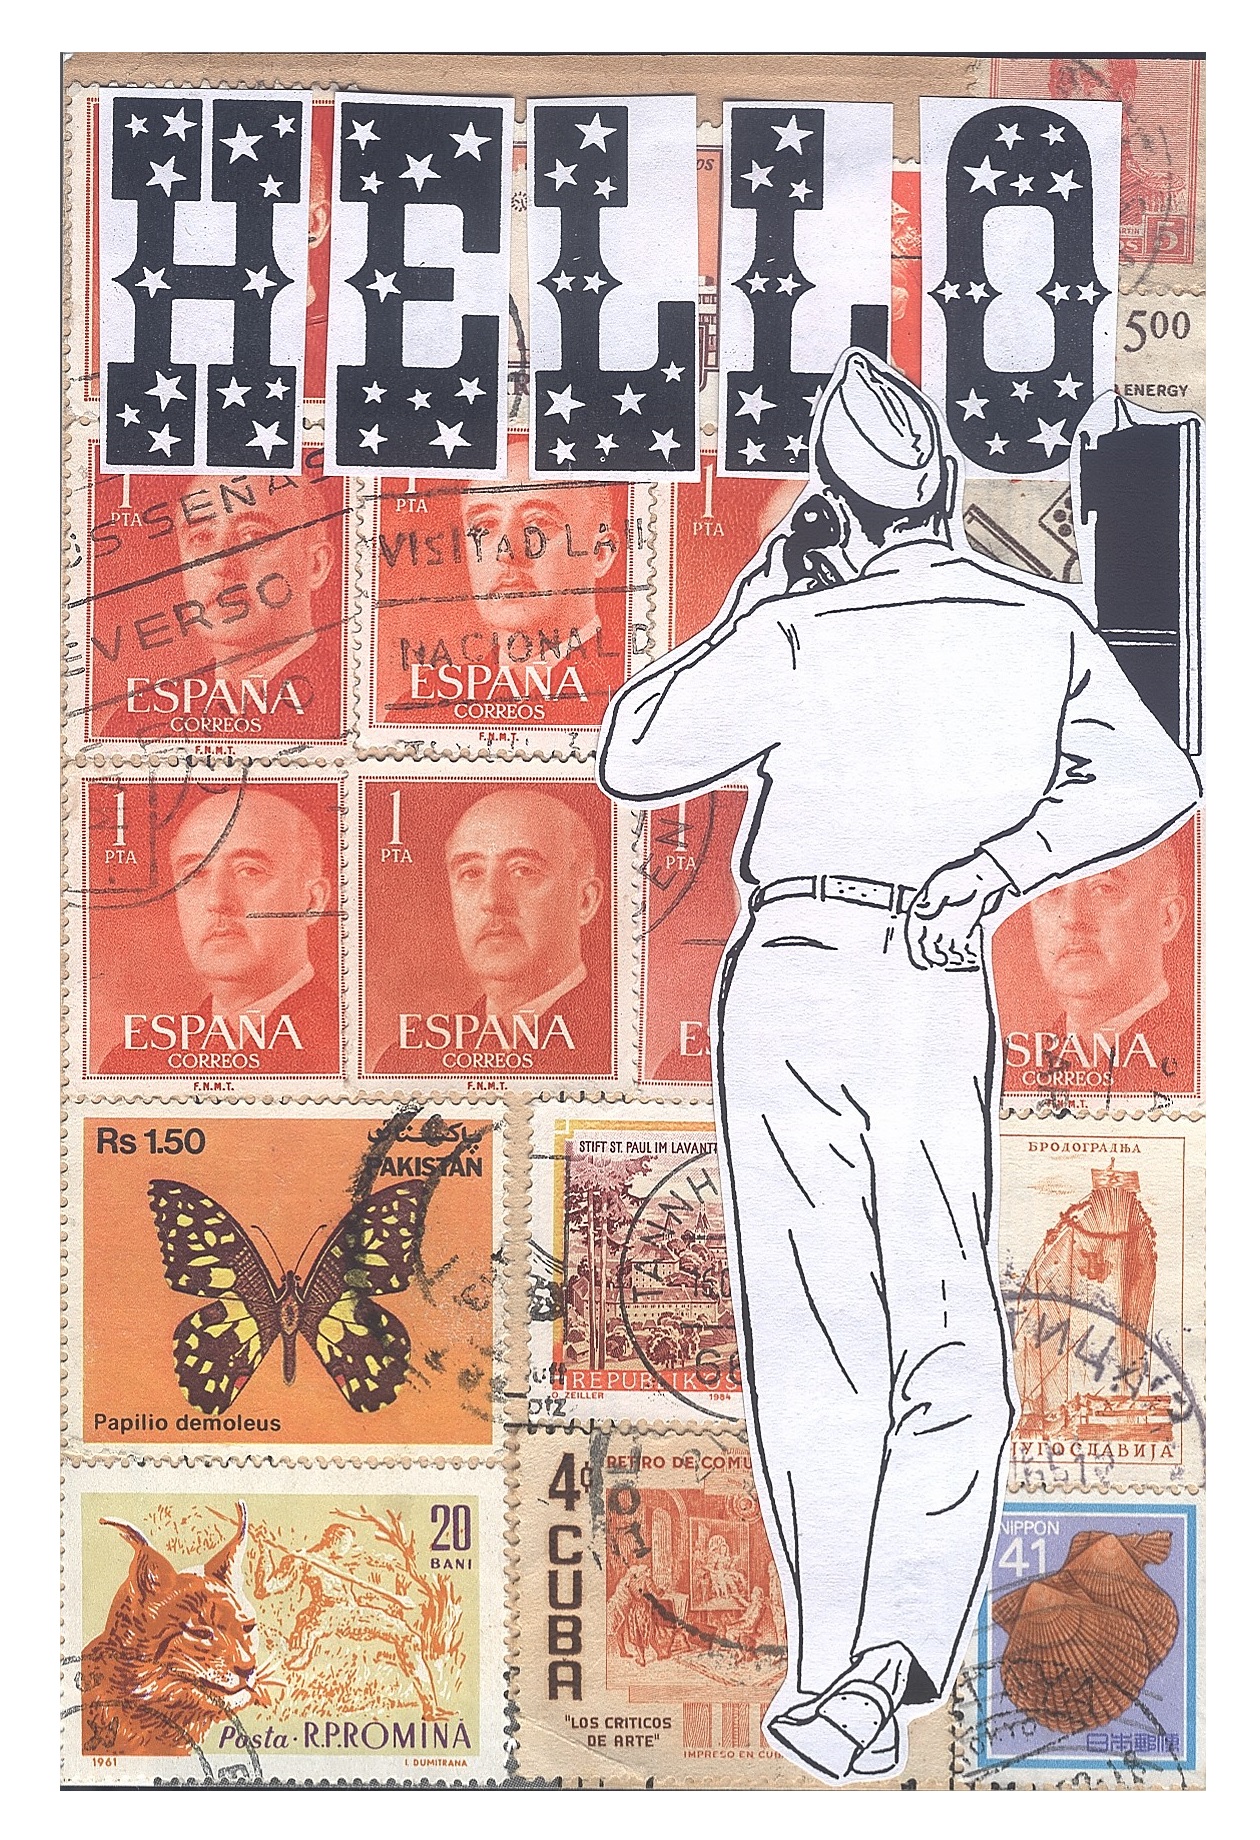 An image of a man with his back facing front, wearing a WW II Marine uniform, making a phone call with the word HELLO above him on a background of mostly pink-colored old stamps with men, butterflies, and animals on them. This manual collage, titled 